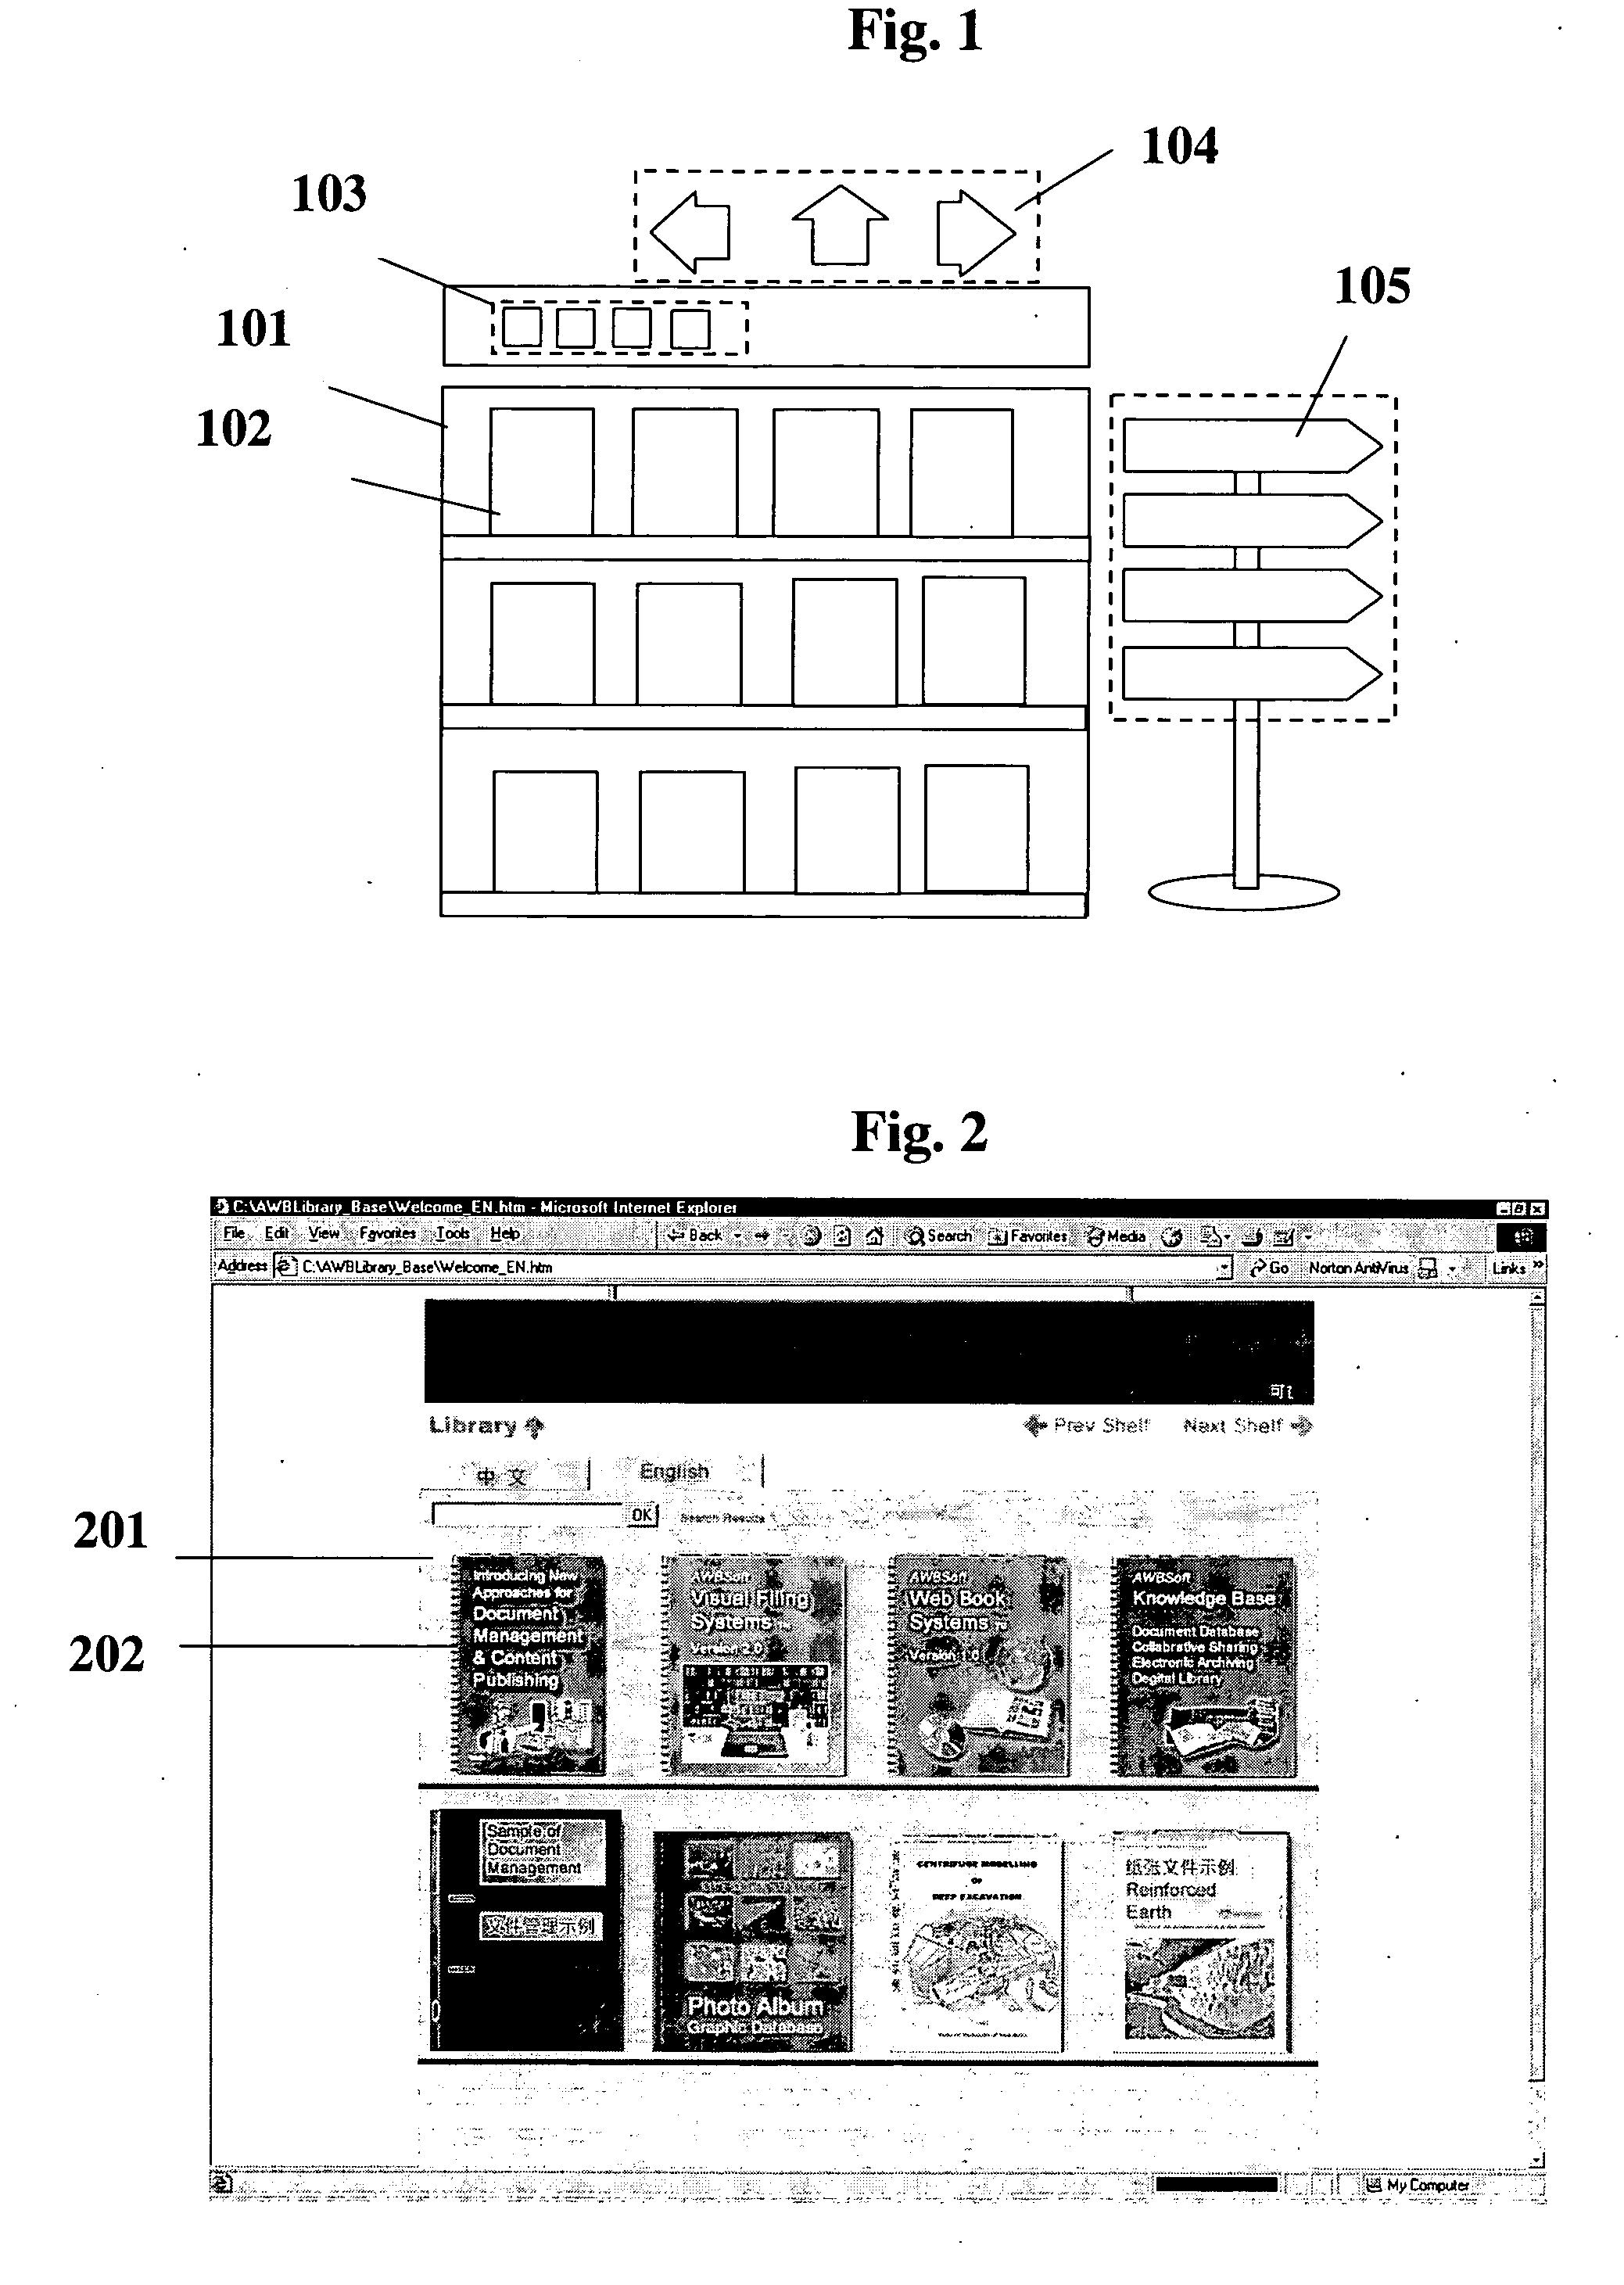 Visual electronic library